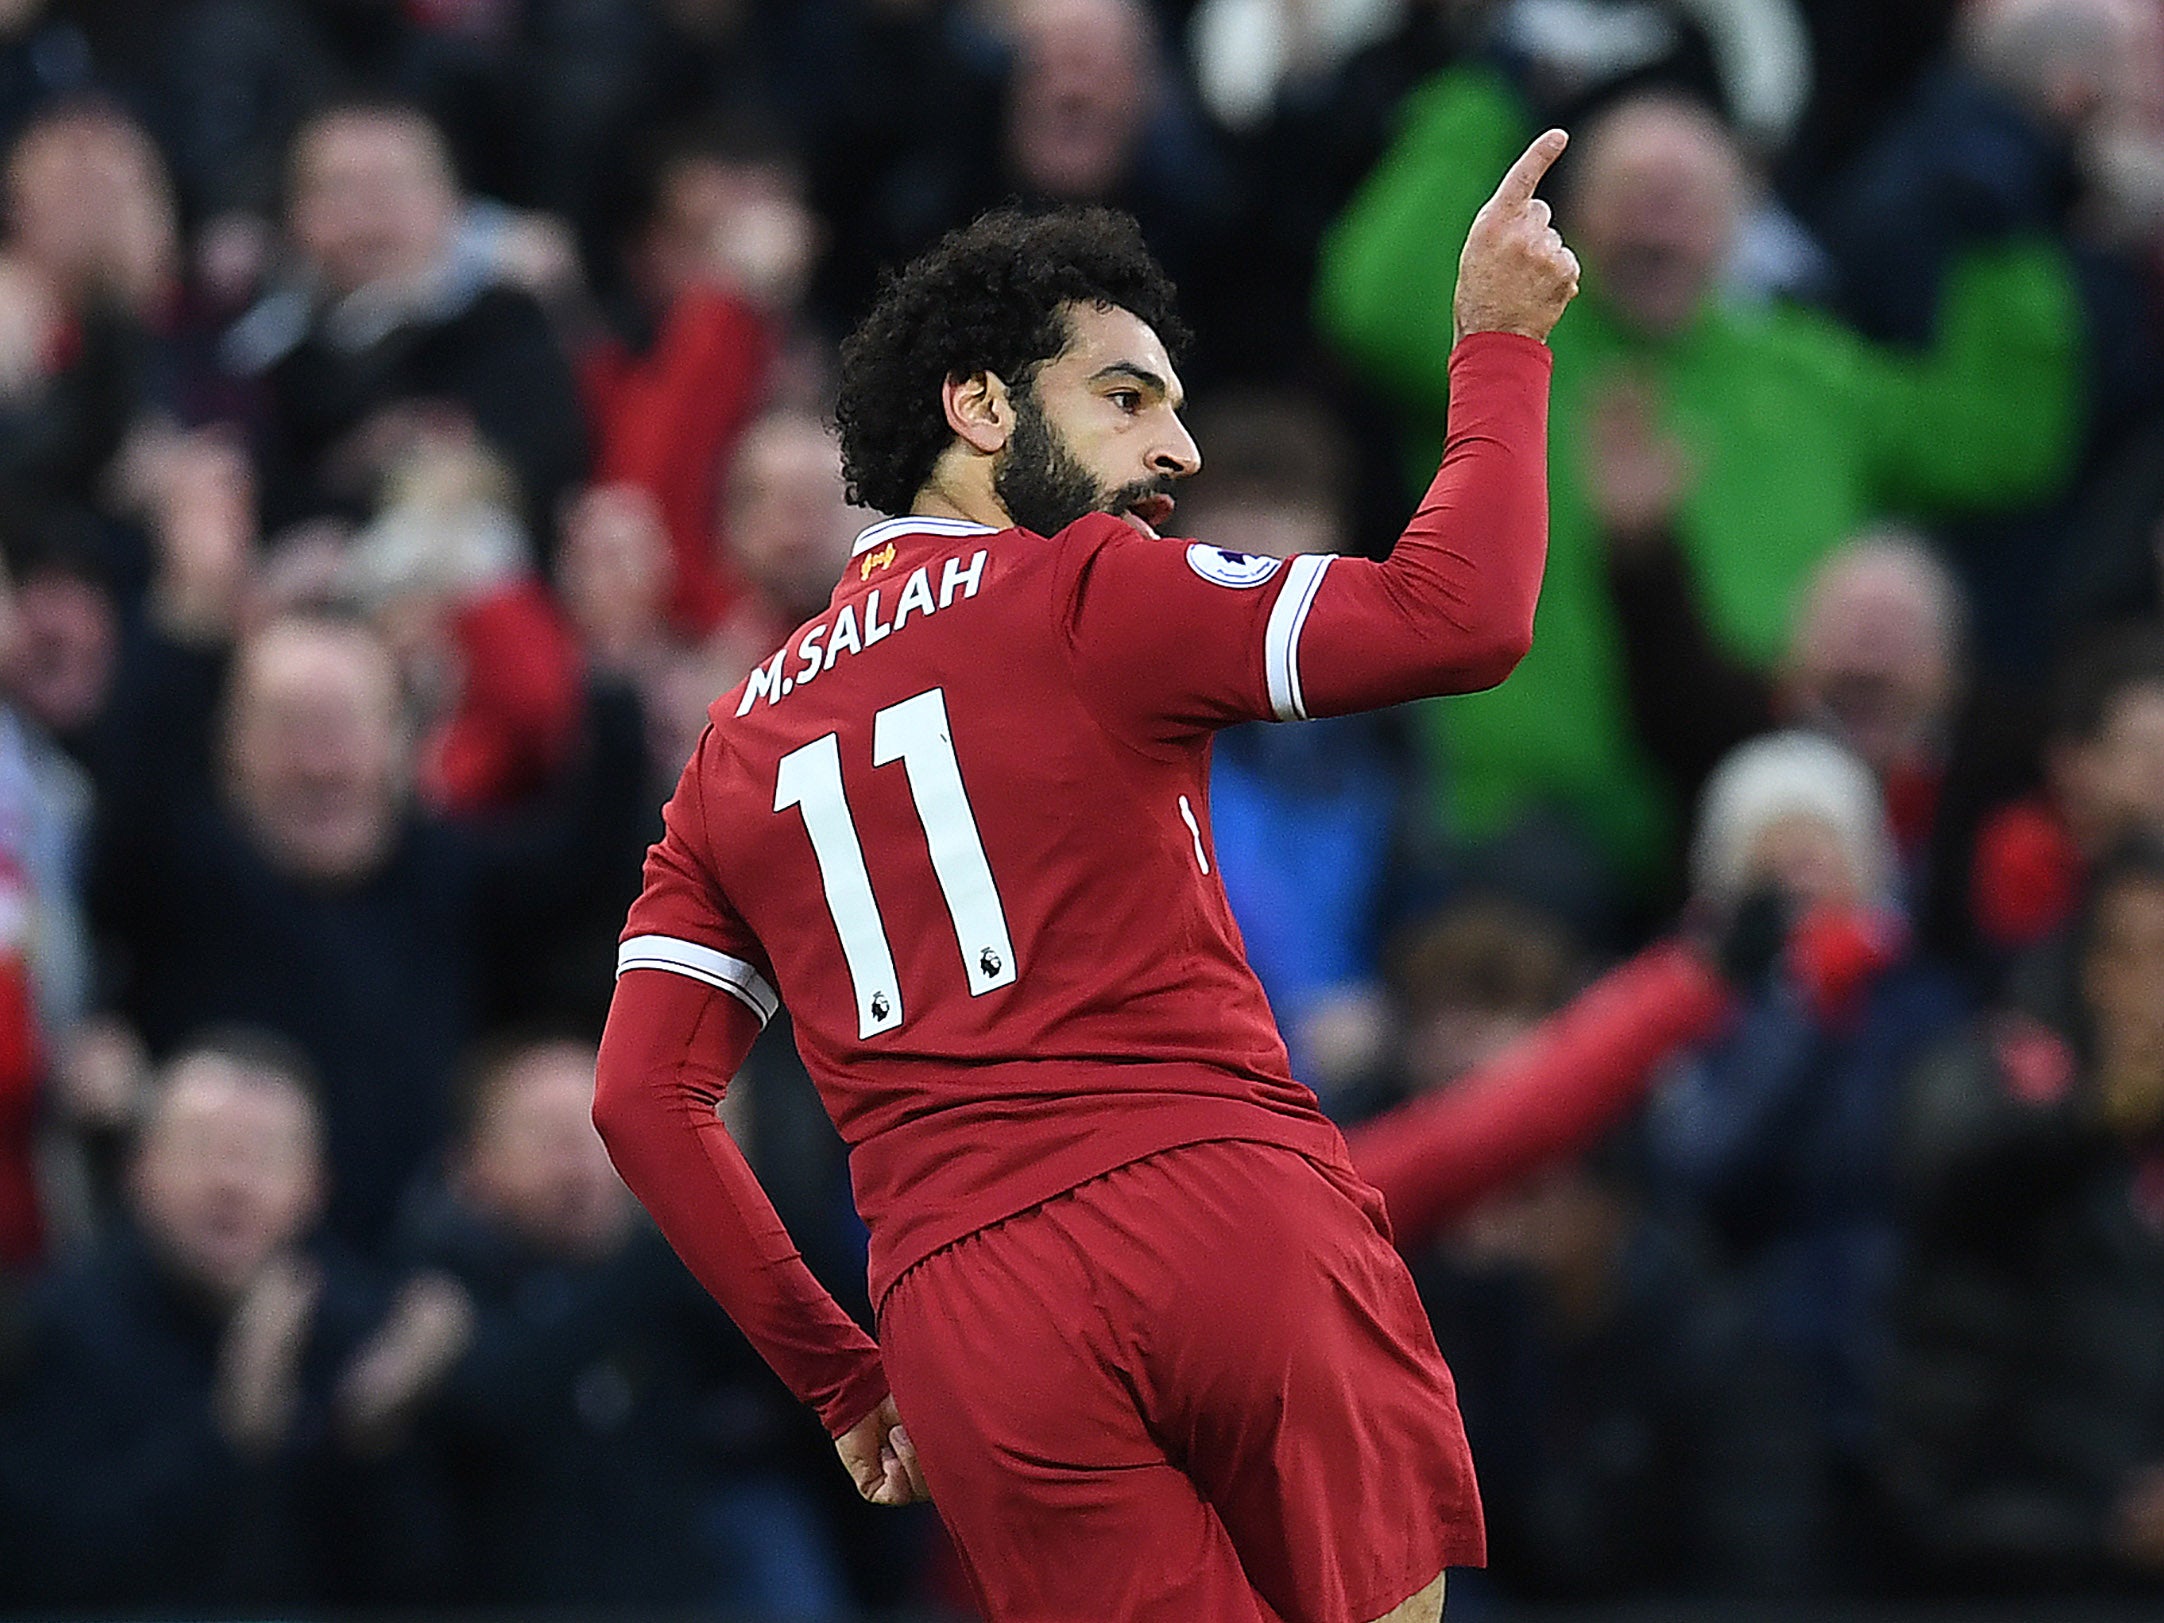 Salah has stunned with his nine goals in 12 games already this season